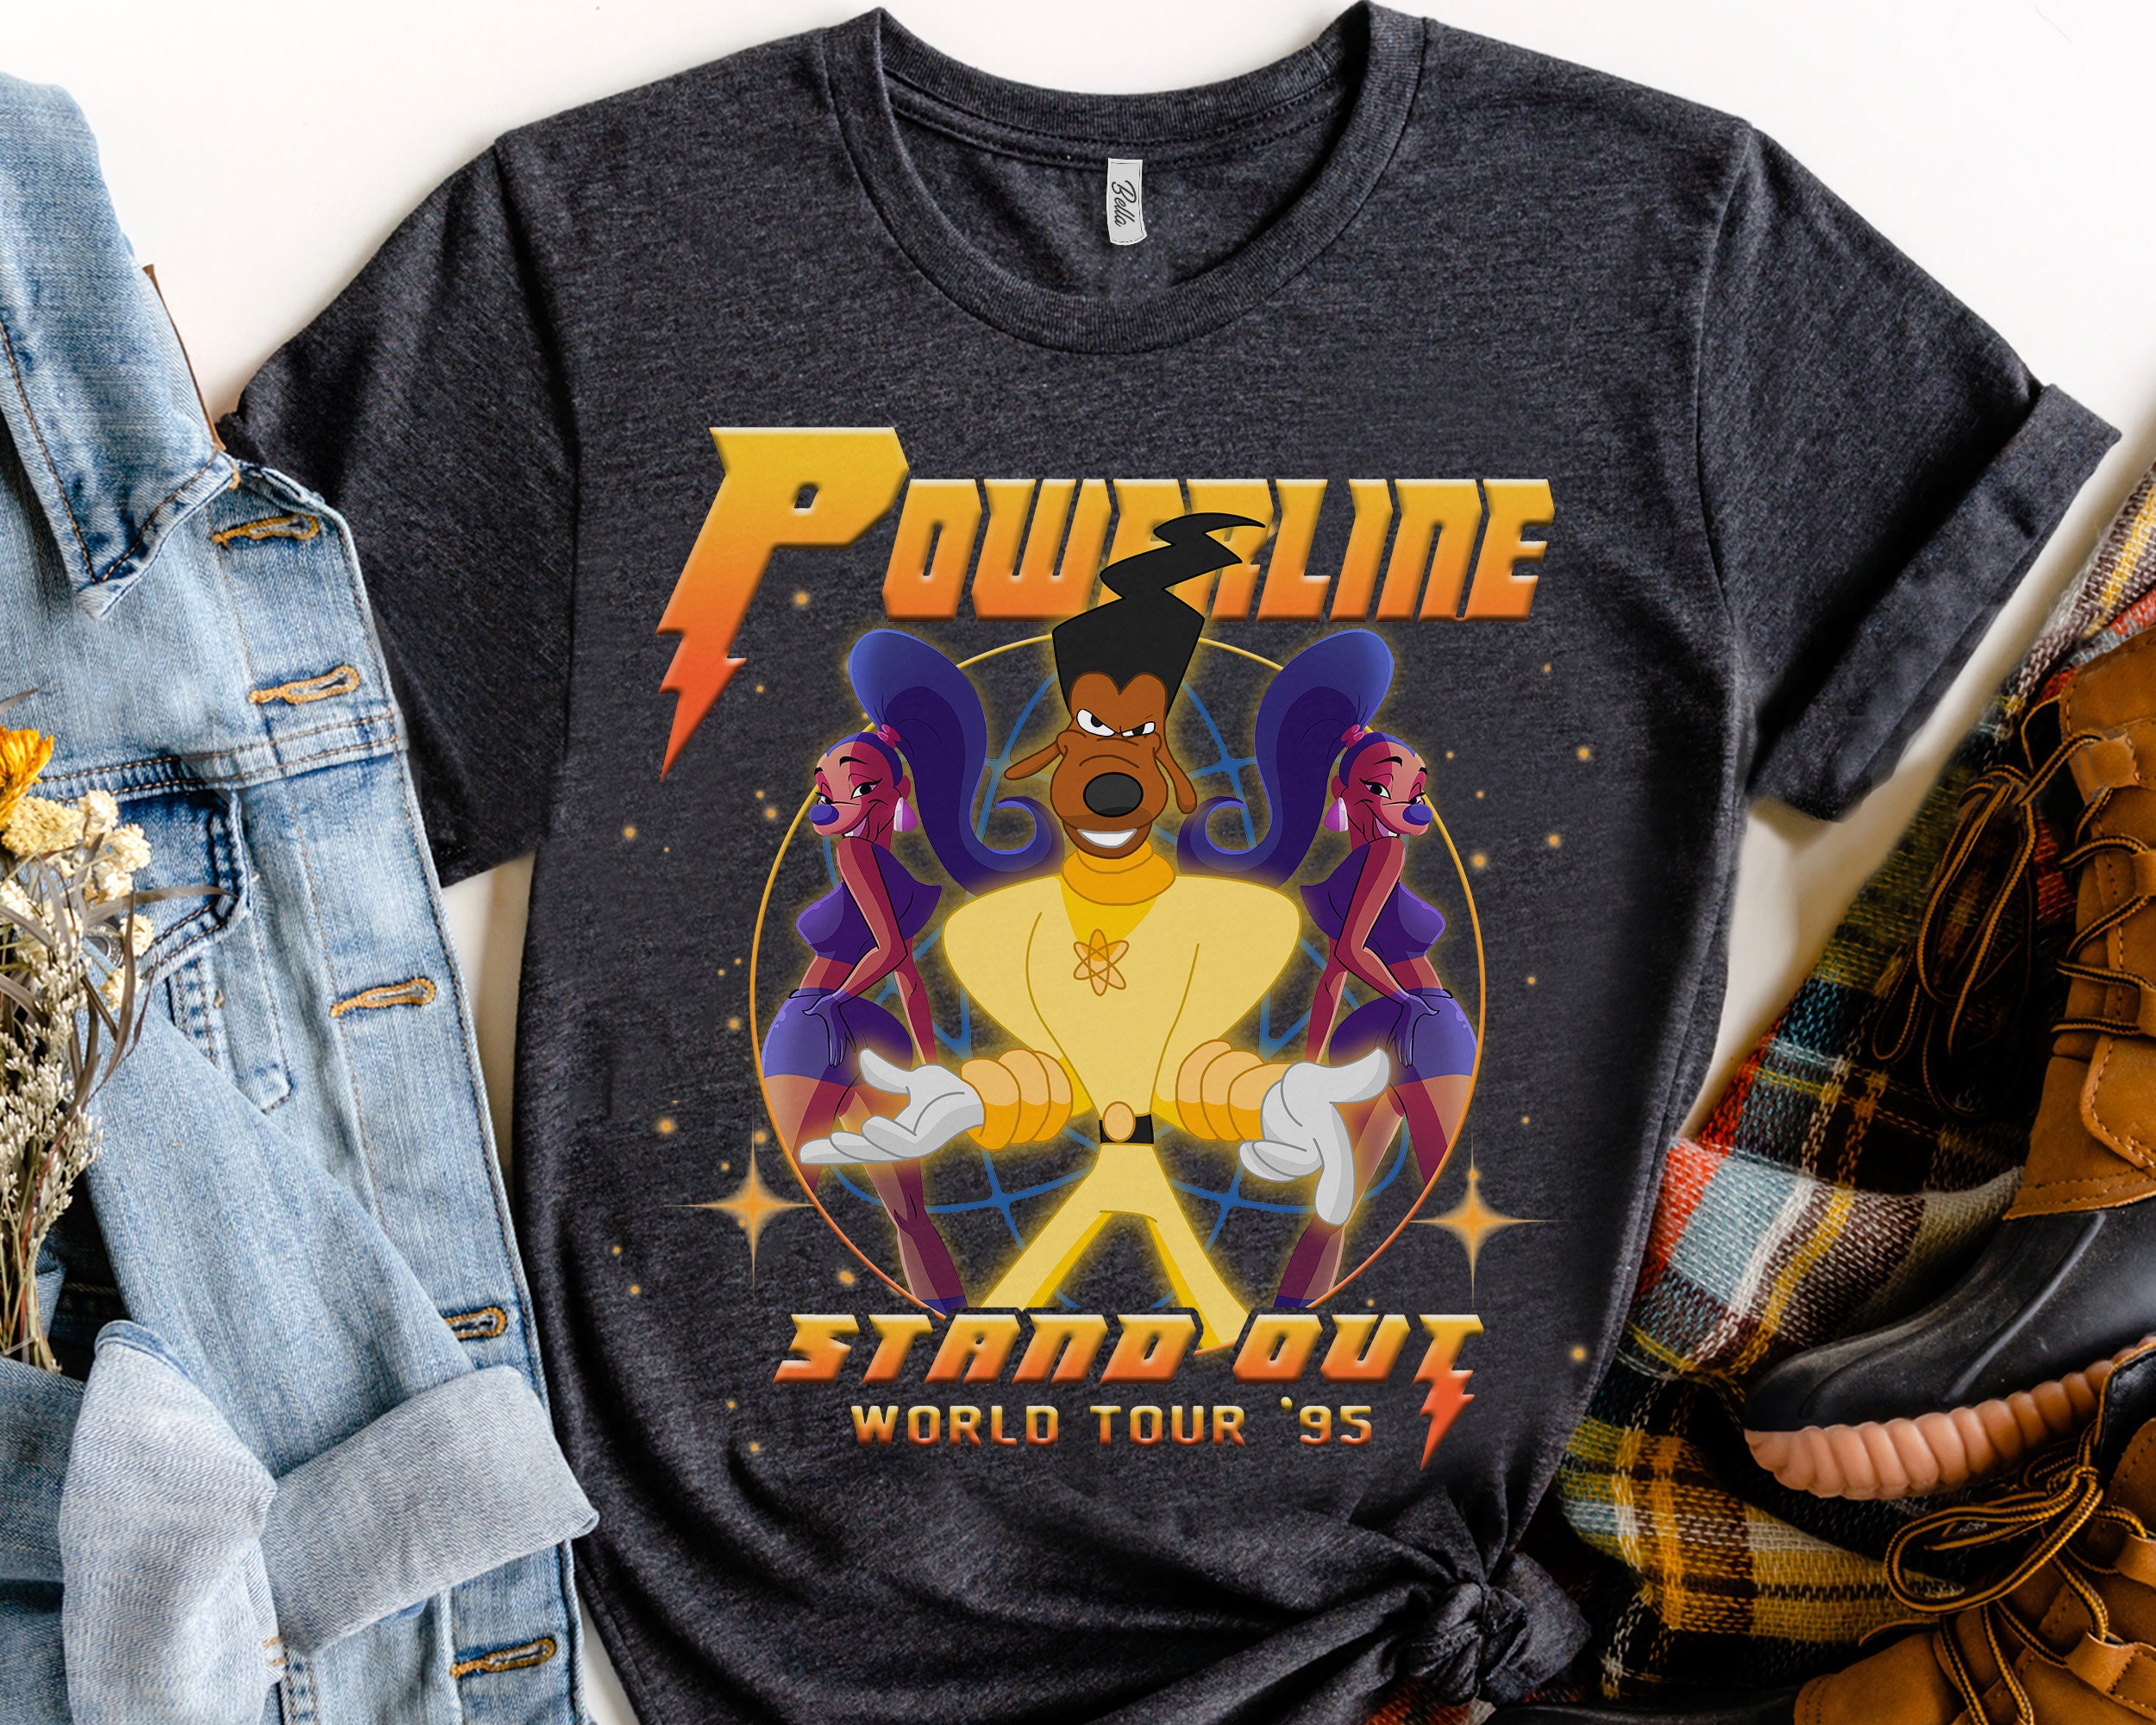 Disney Powerline Stand Out Tour 94 Shirt, Vintage Goofy Movie Powerline  Shirt, Powerline Stand Out Tour Goofy Movie Shirt, Max Goofy Shirt -   Canada